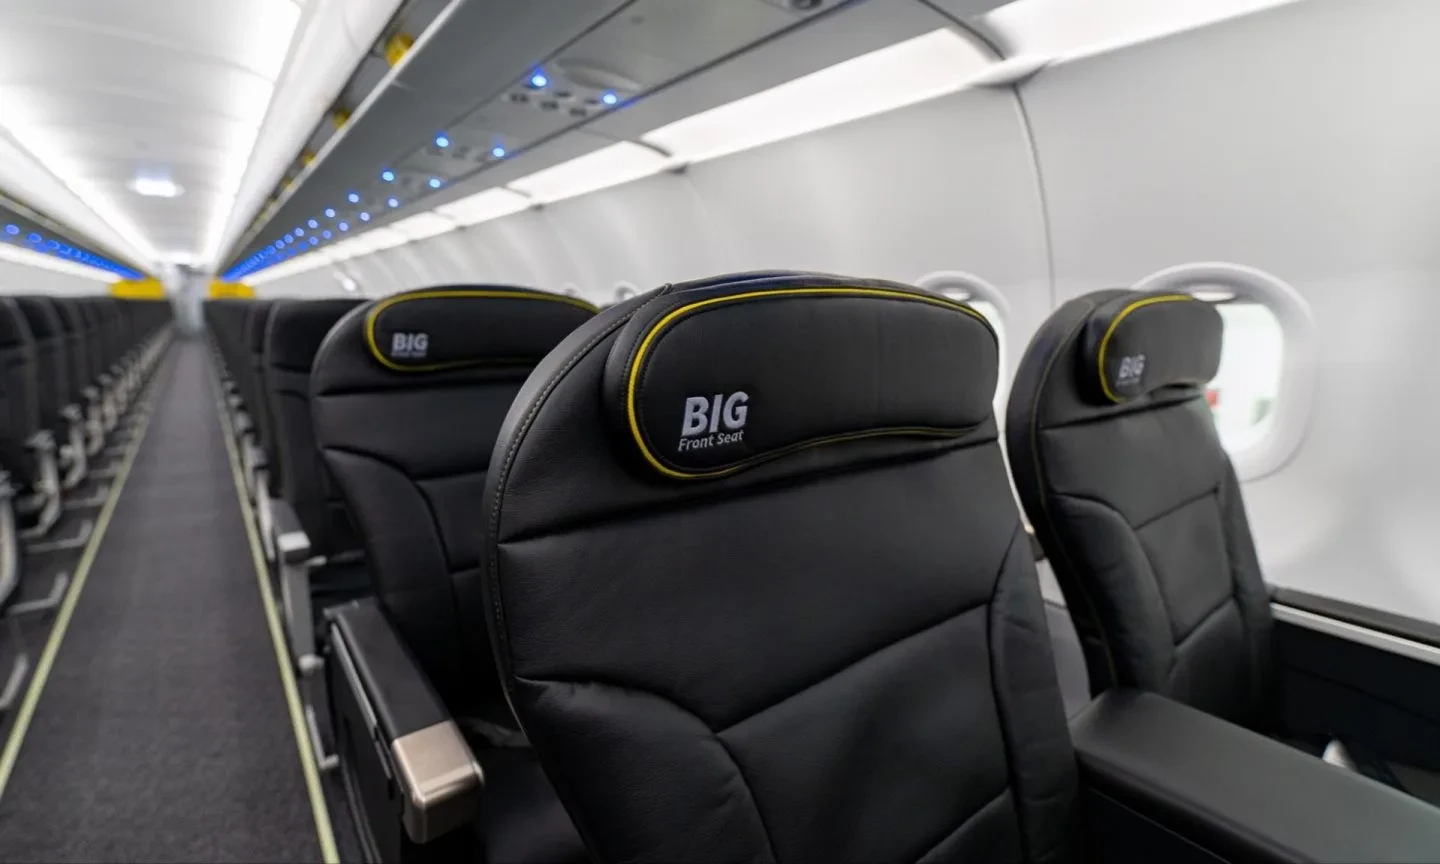 seats in savers club of spirit airlines